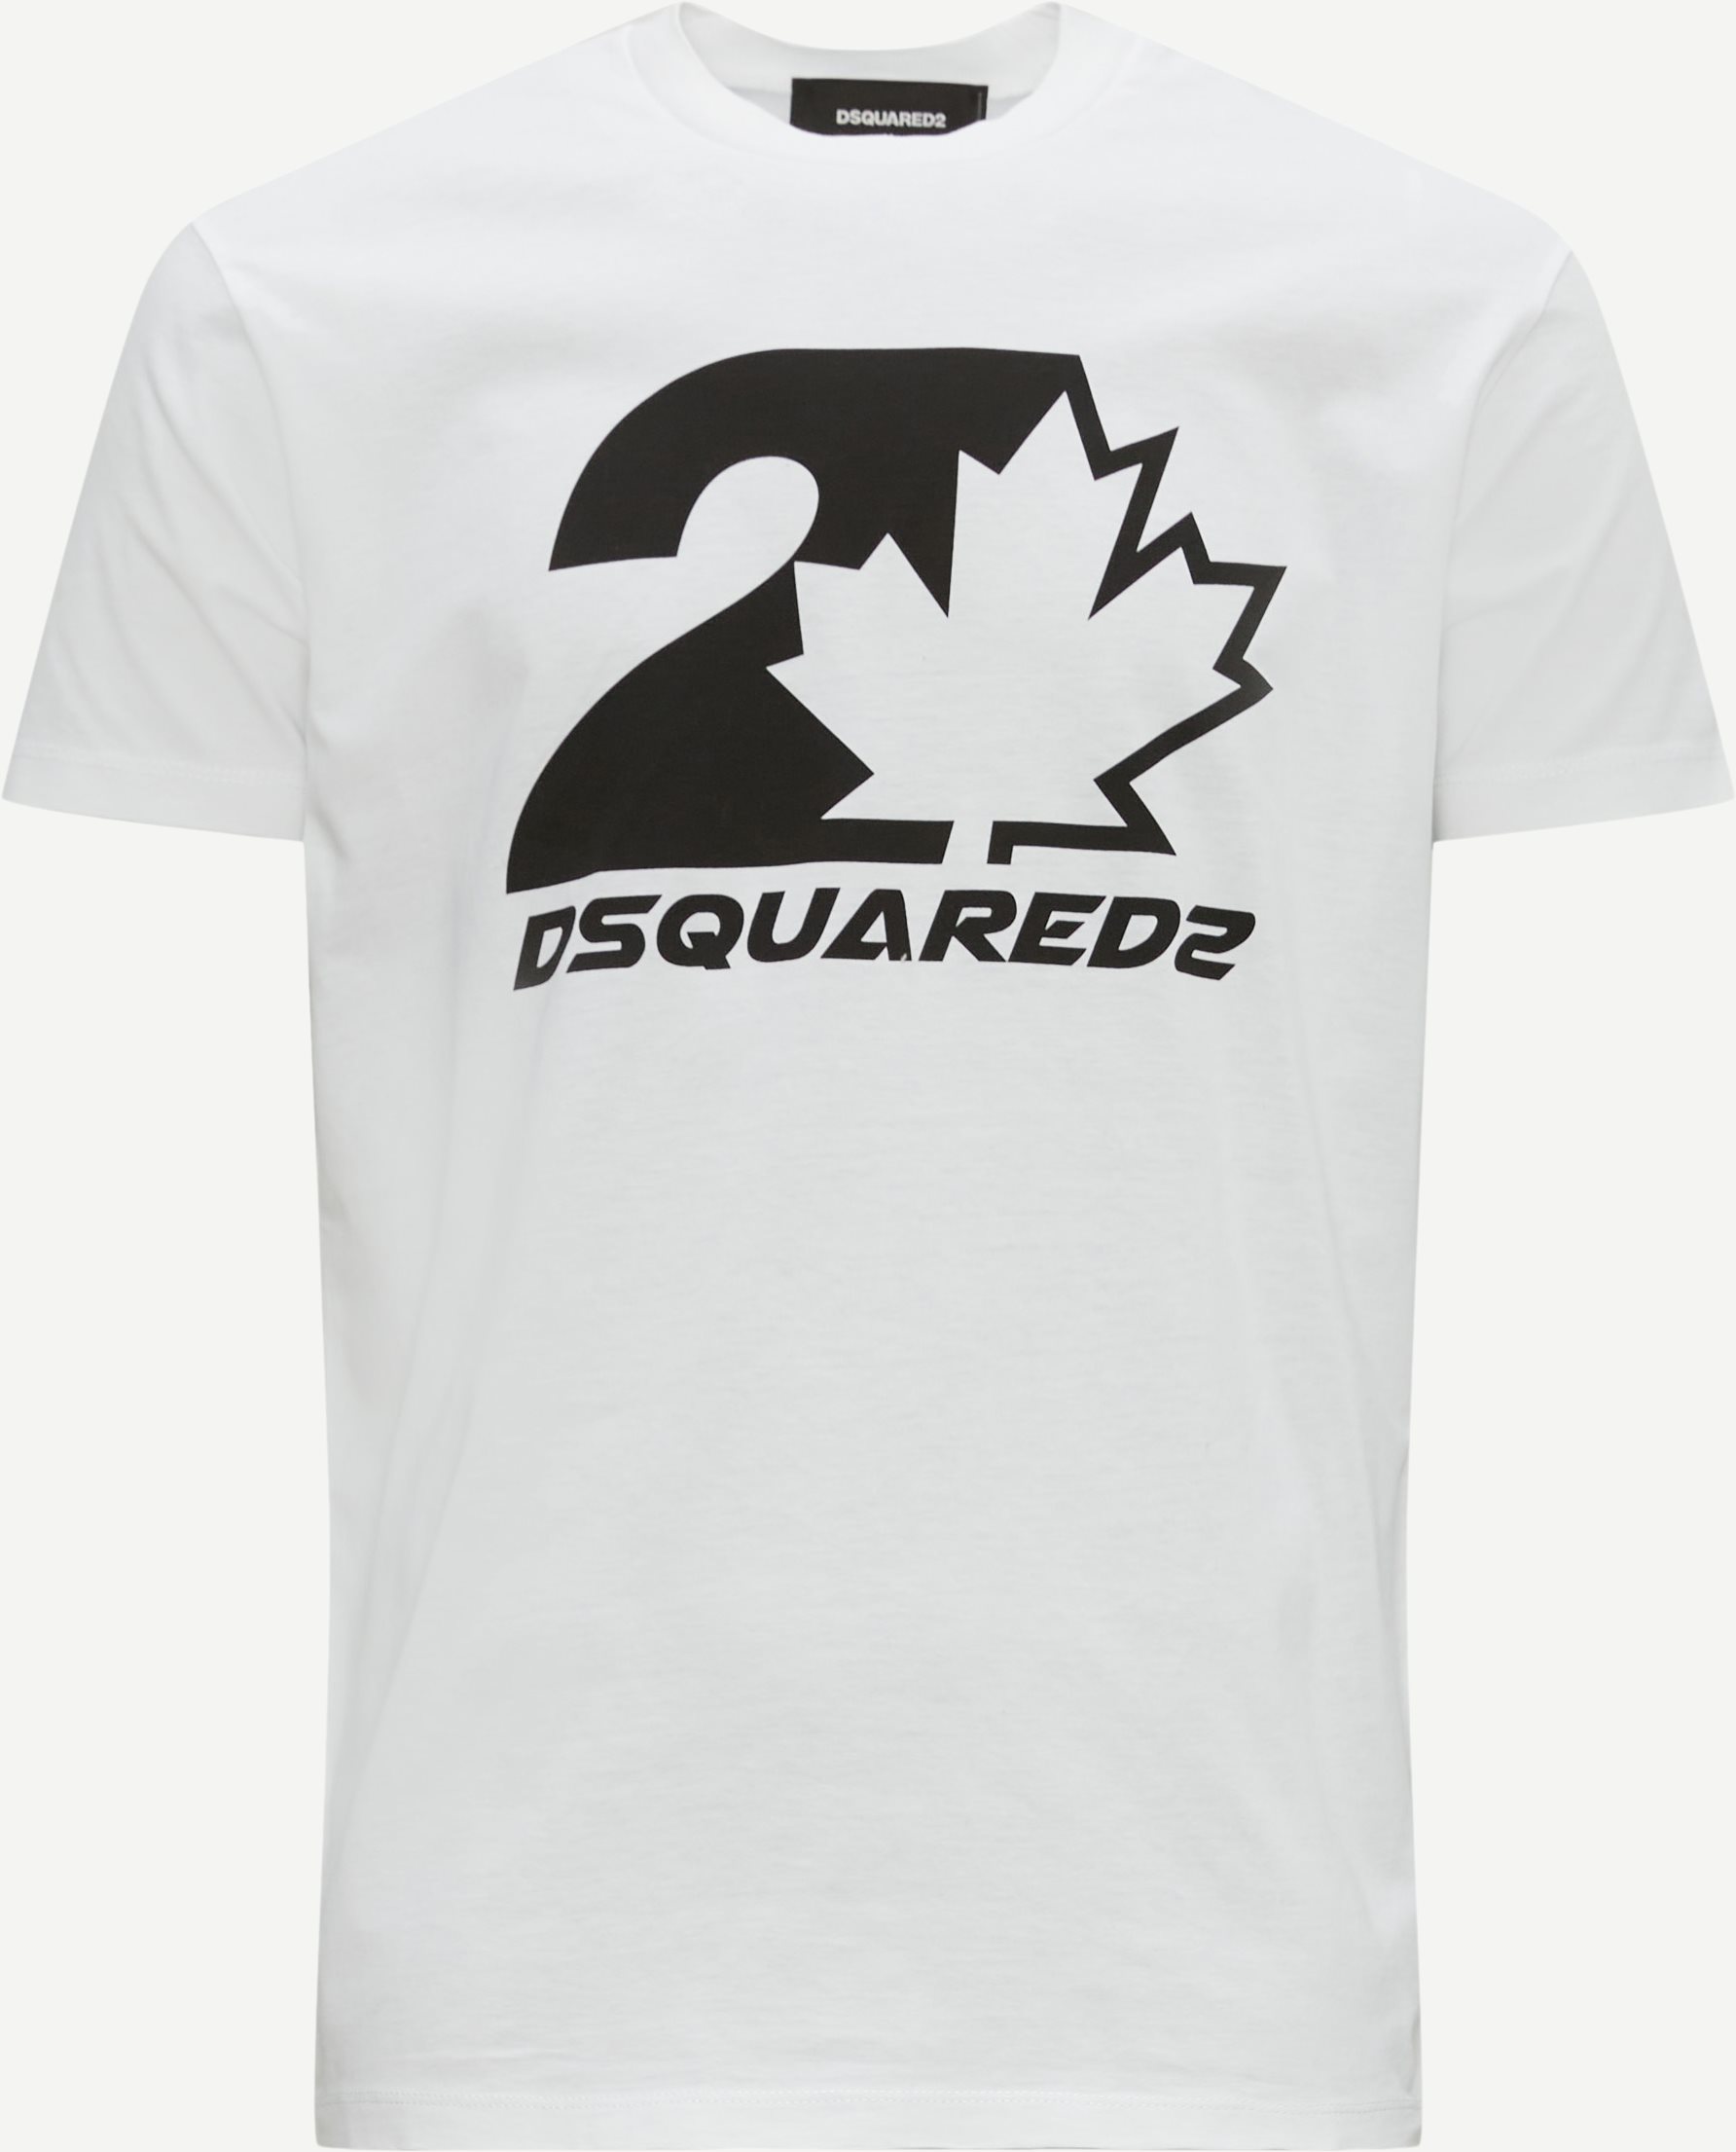 Dsquared2 T-shirts S74GD1157 S23009 White